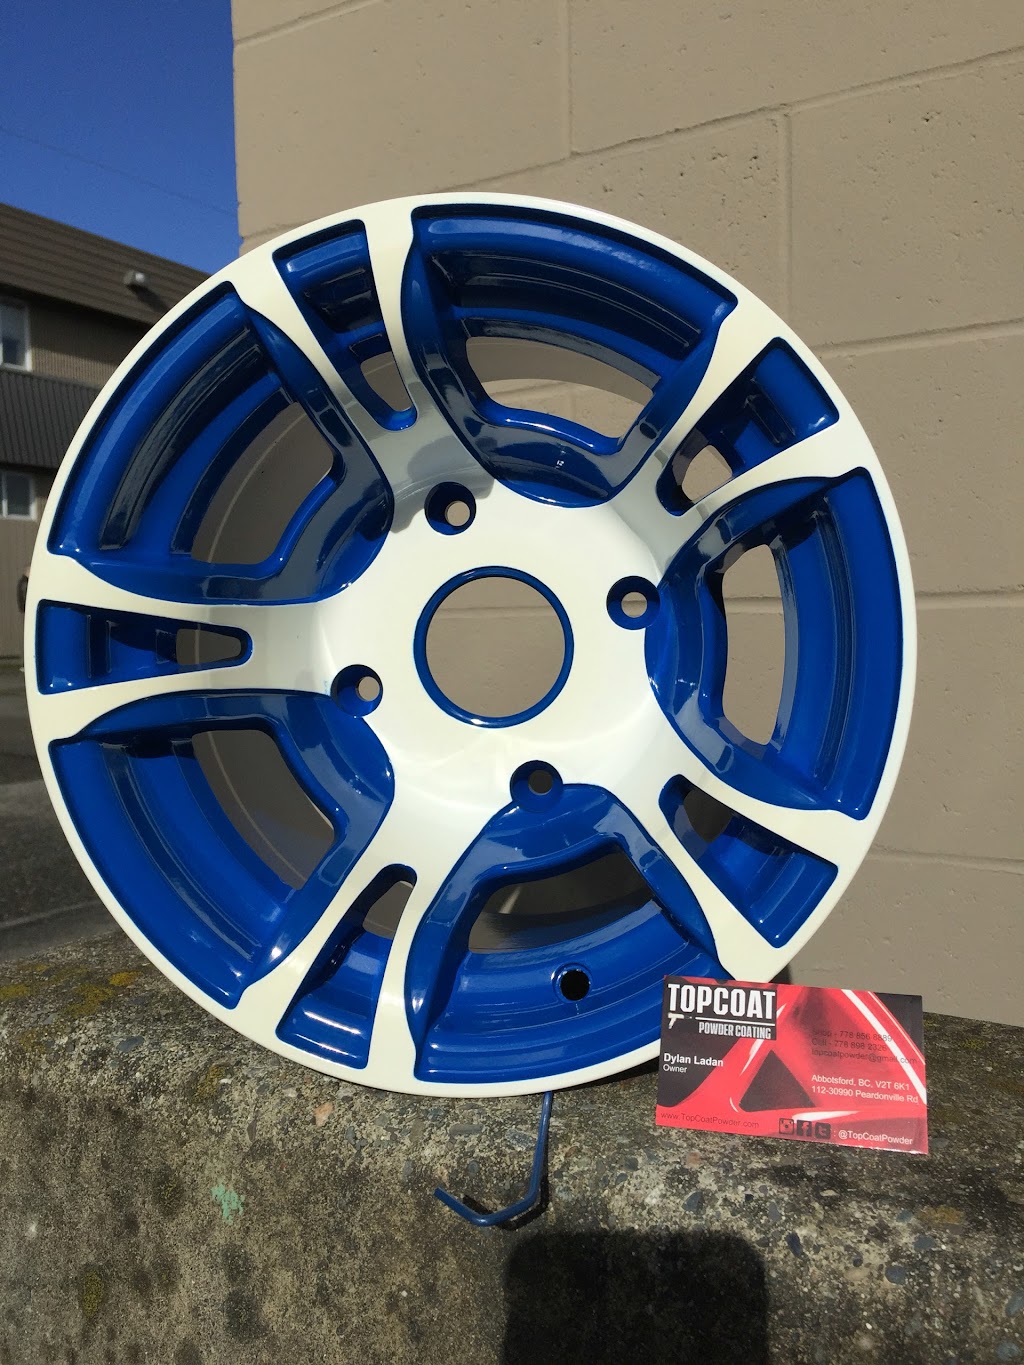 TopCoat Powder Coating | point of interest | 2121 Paramount Crescent, Abbotsford, BC V2T 6A5, Canada | 7788568889 OR +1 778-856-8889